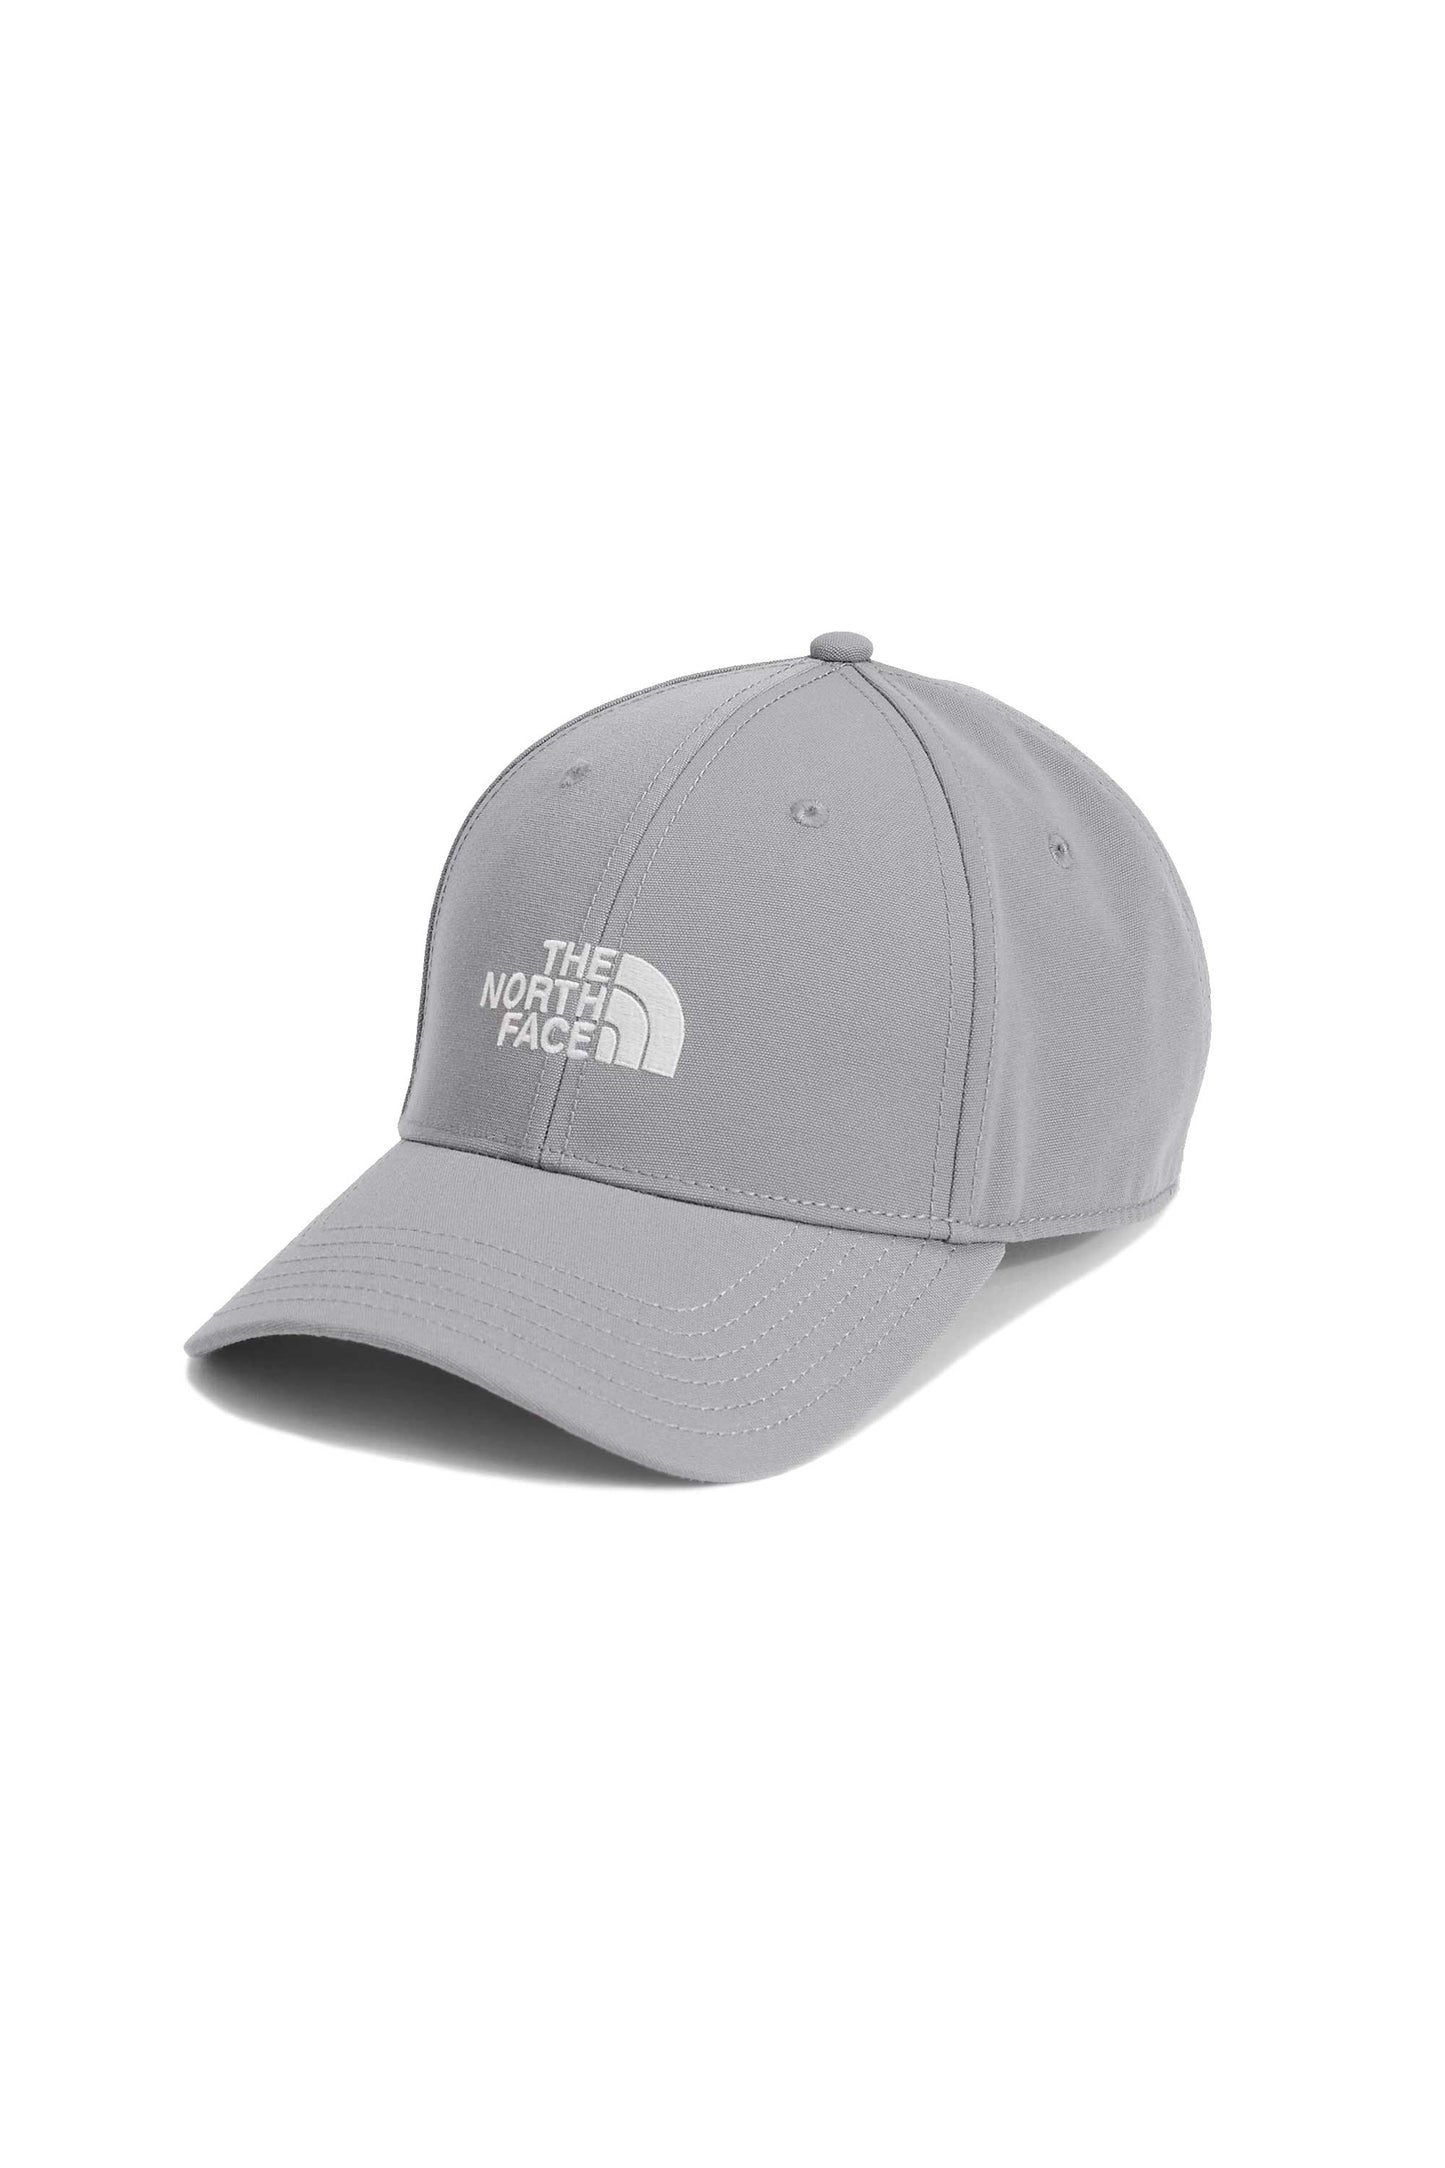 Pukas-Surf-Shop-The-North-Face-recycled-66-classic-hat-meld-grey